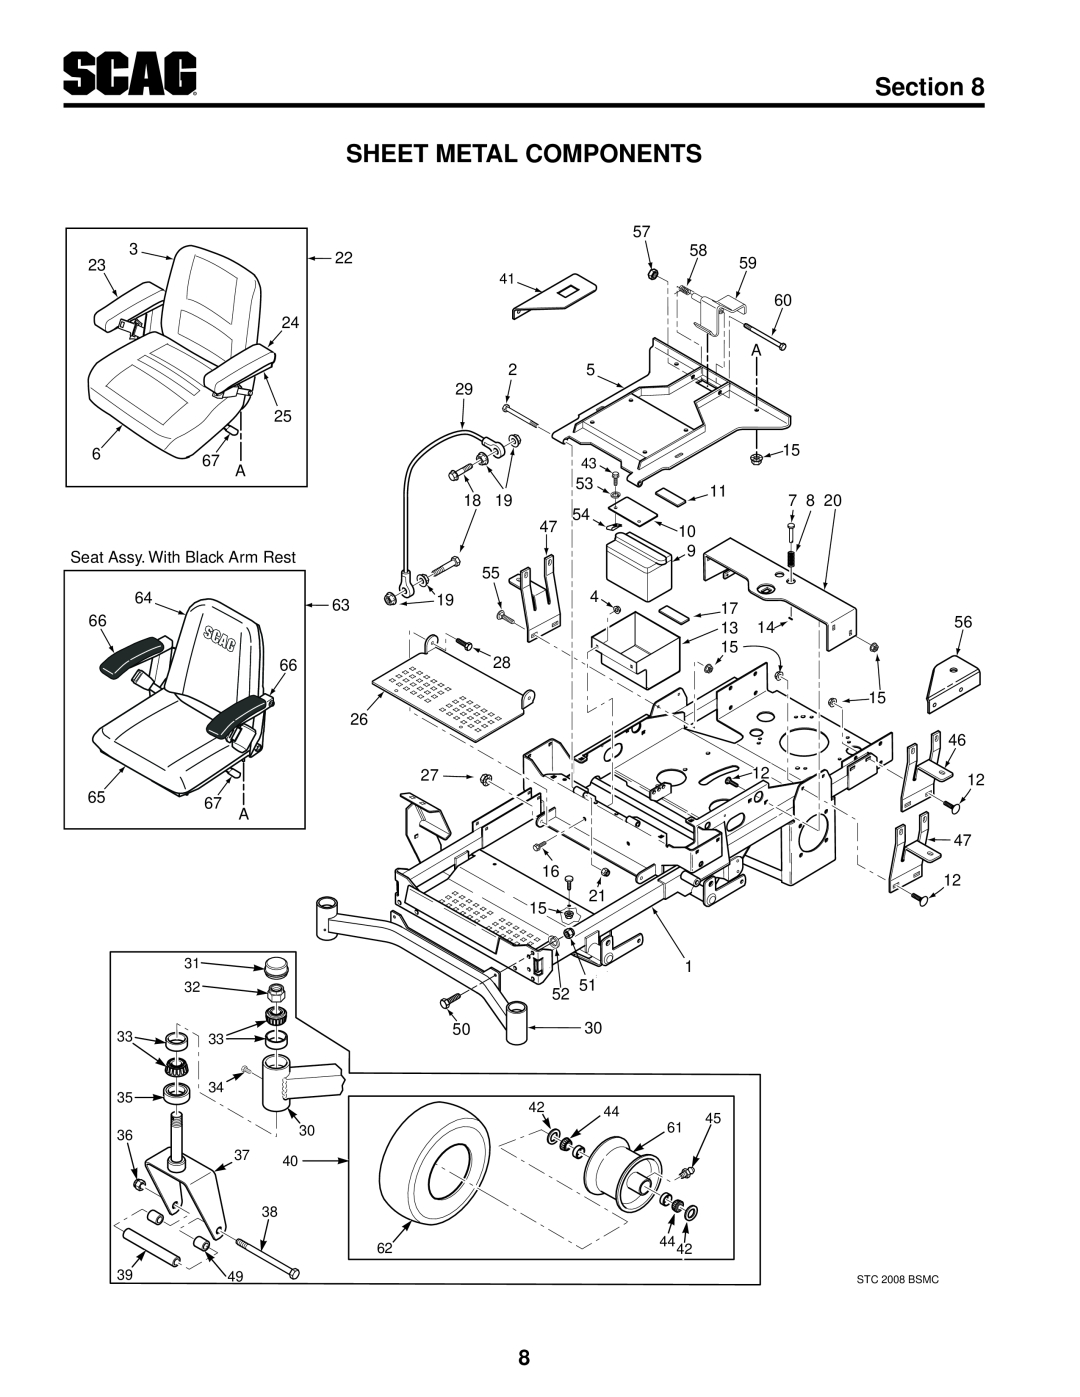 Scag Power Equipment SMWC-52V, SMWC-61V, SMTC-48V manual Sheet Metal Components, Section, STC 2008 BSMC 